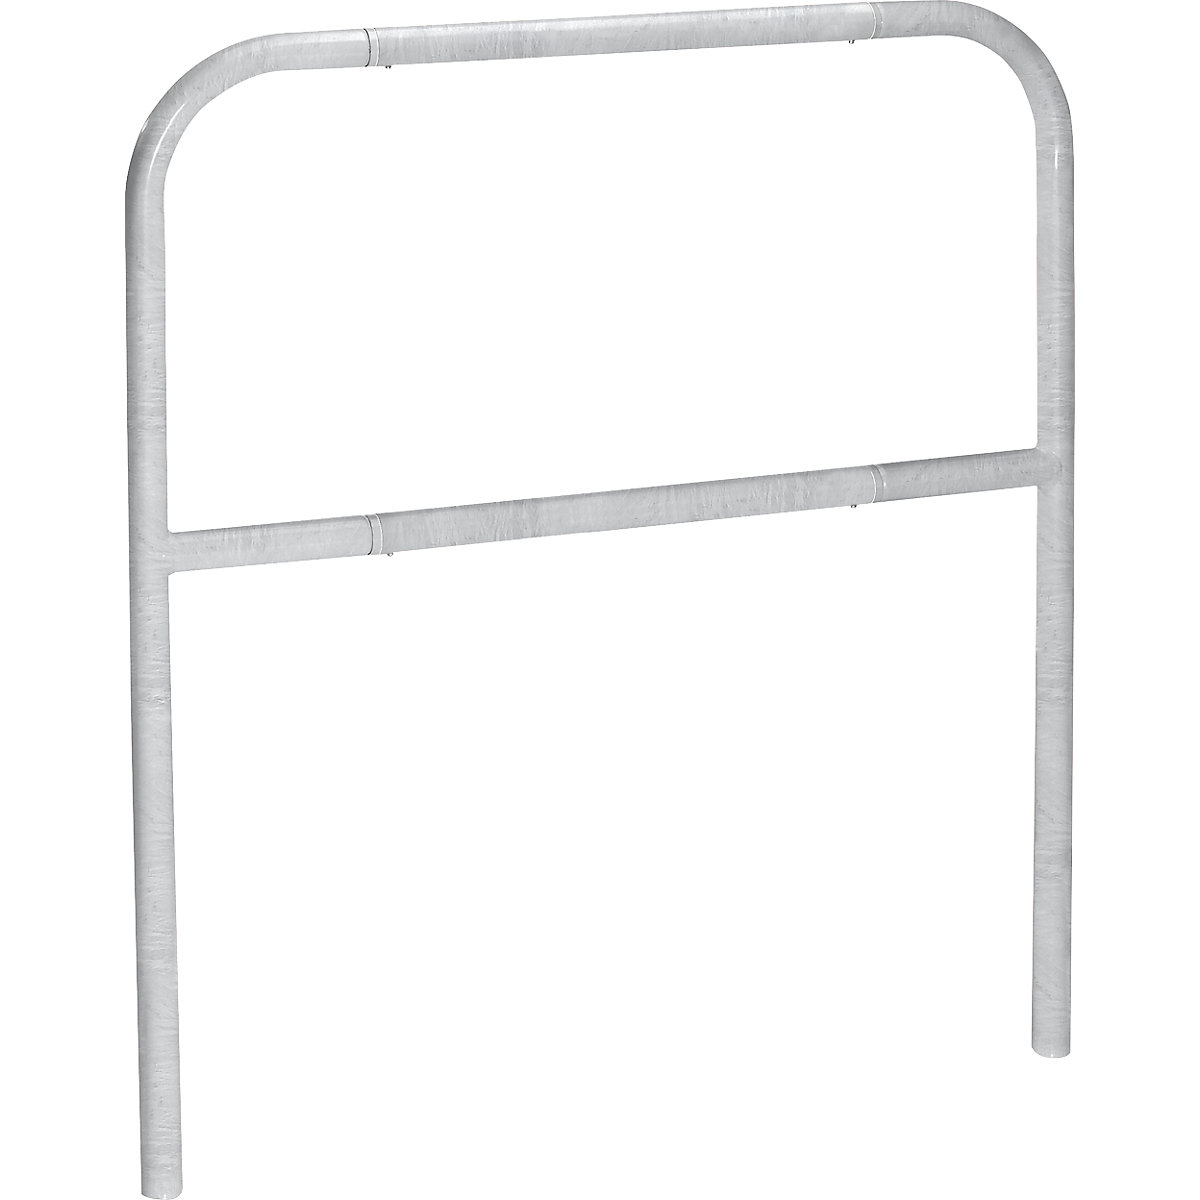 Crash protection bar, for setting in concrete, width 1000 mm, zinc plated-11